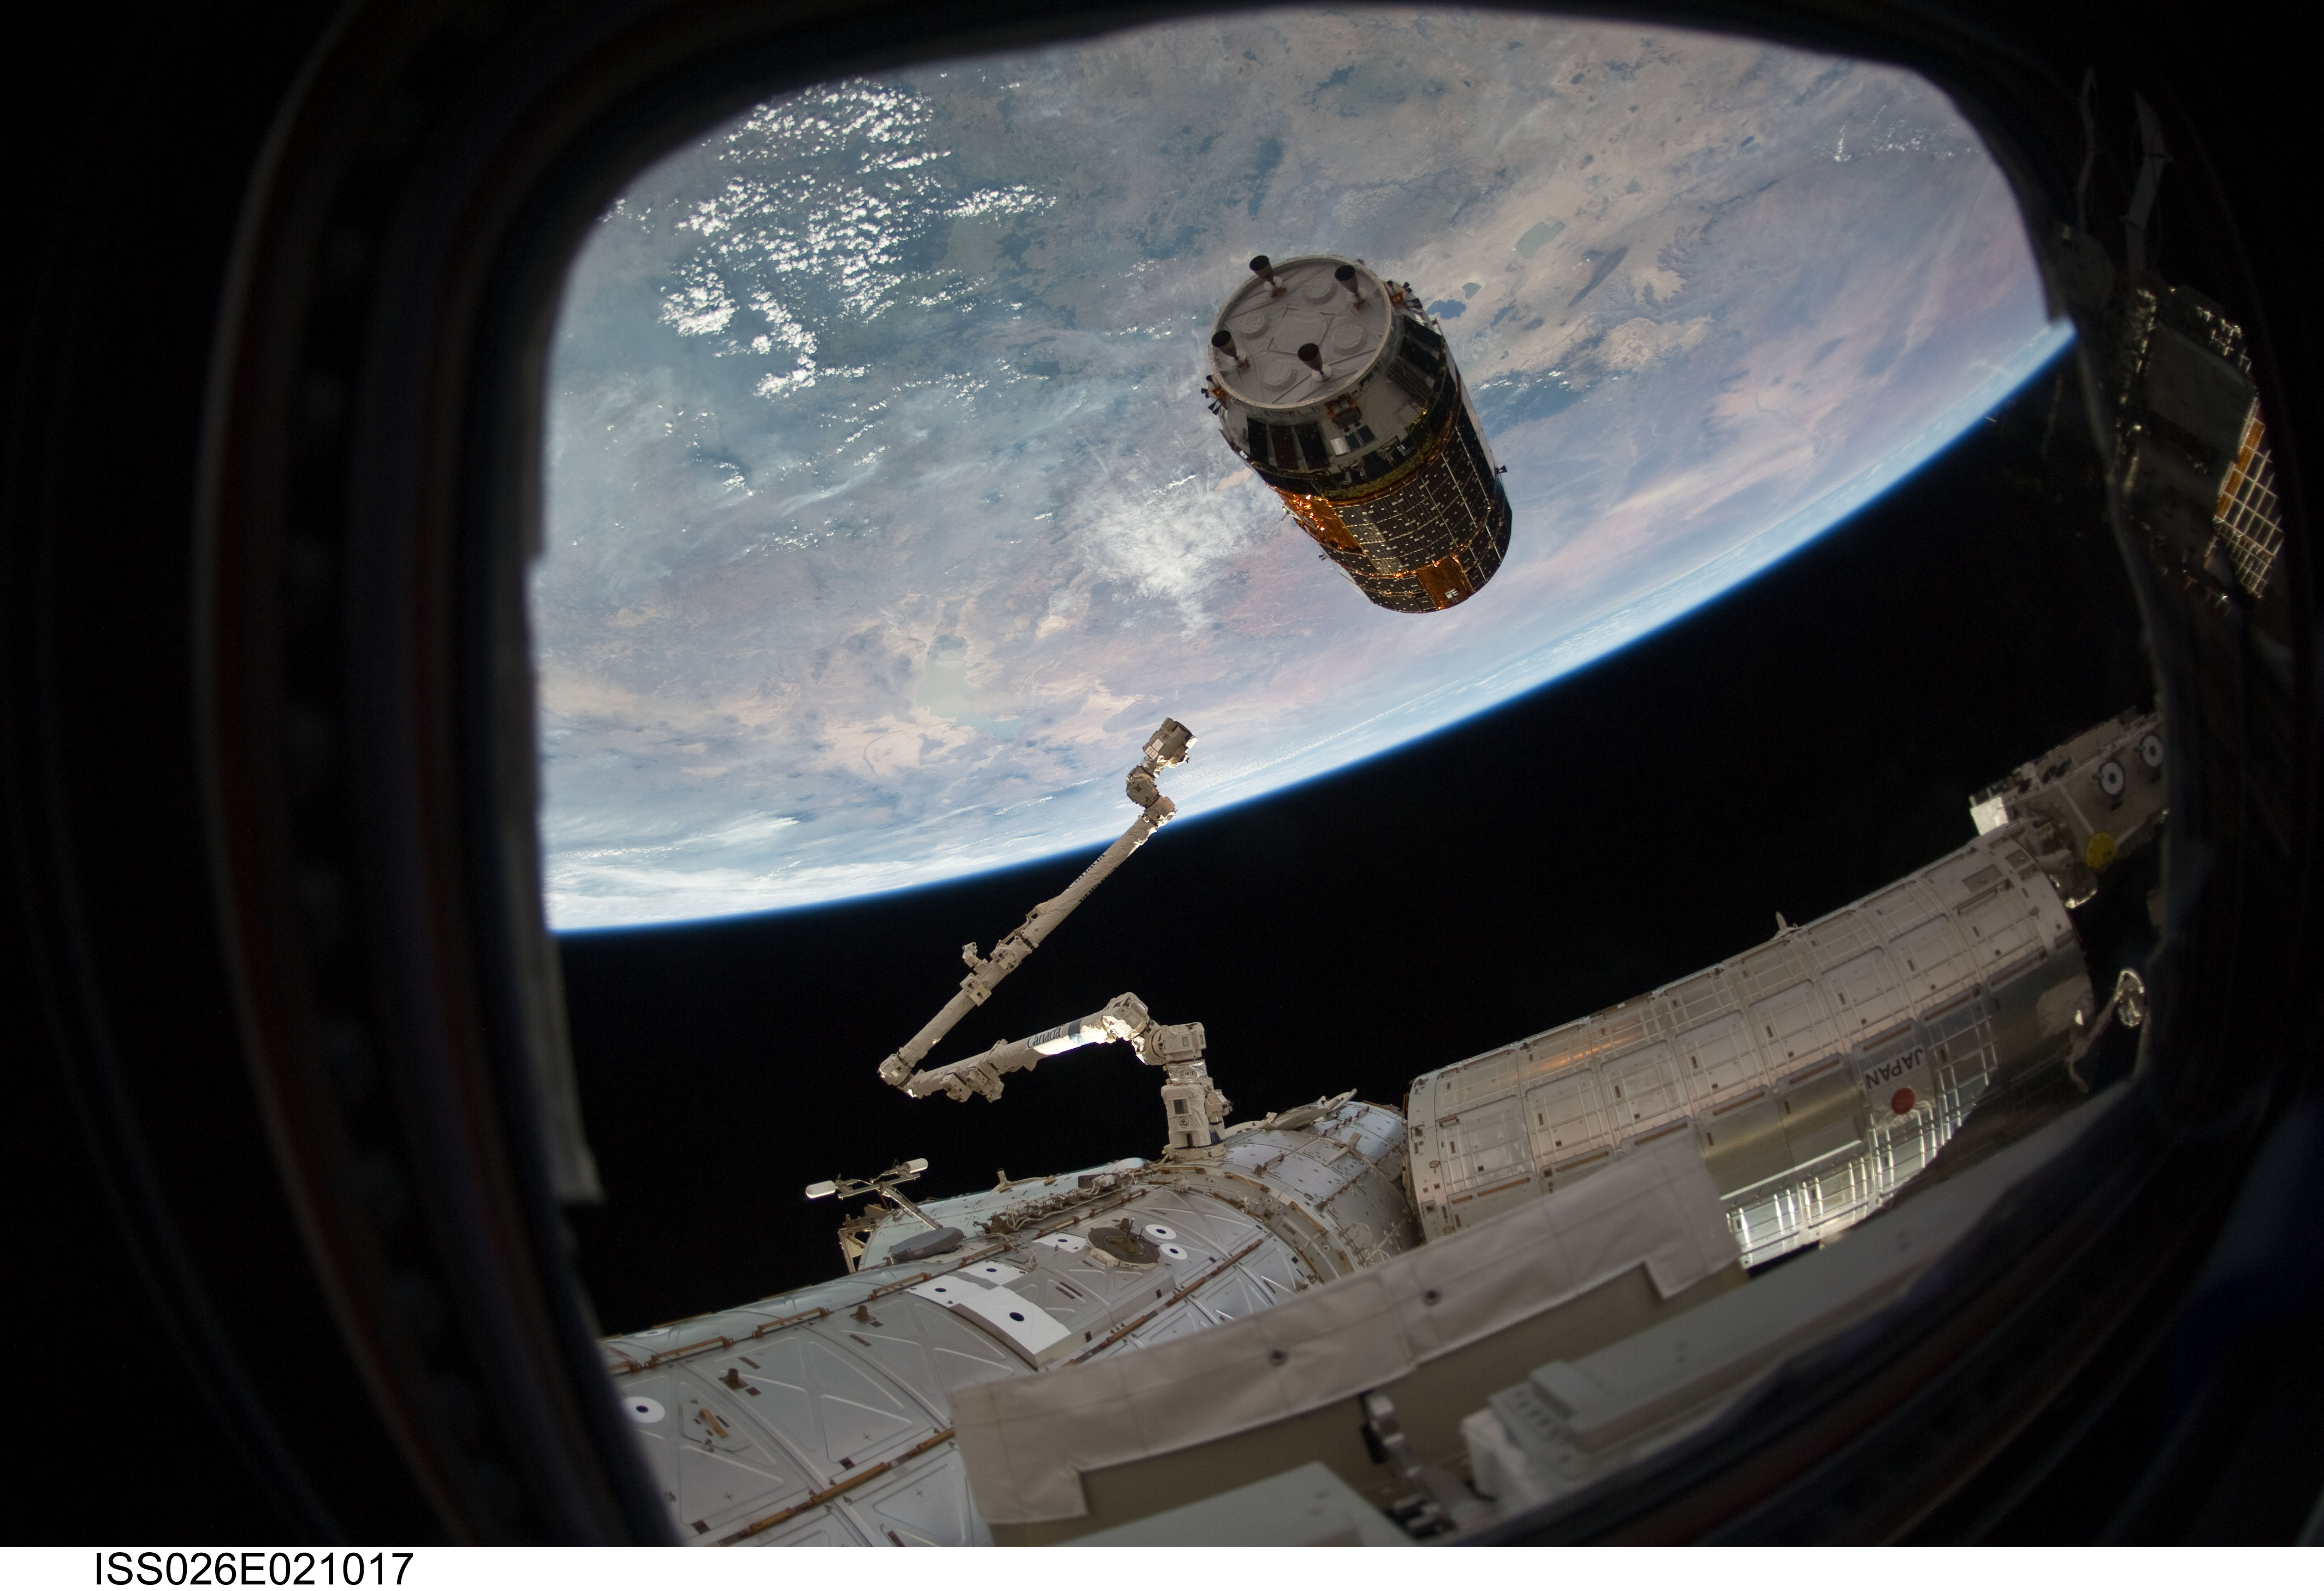 Japans Kounotori2 Supply Ship Approaches the Space Station